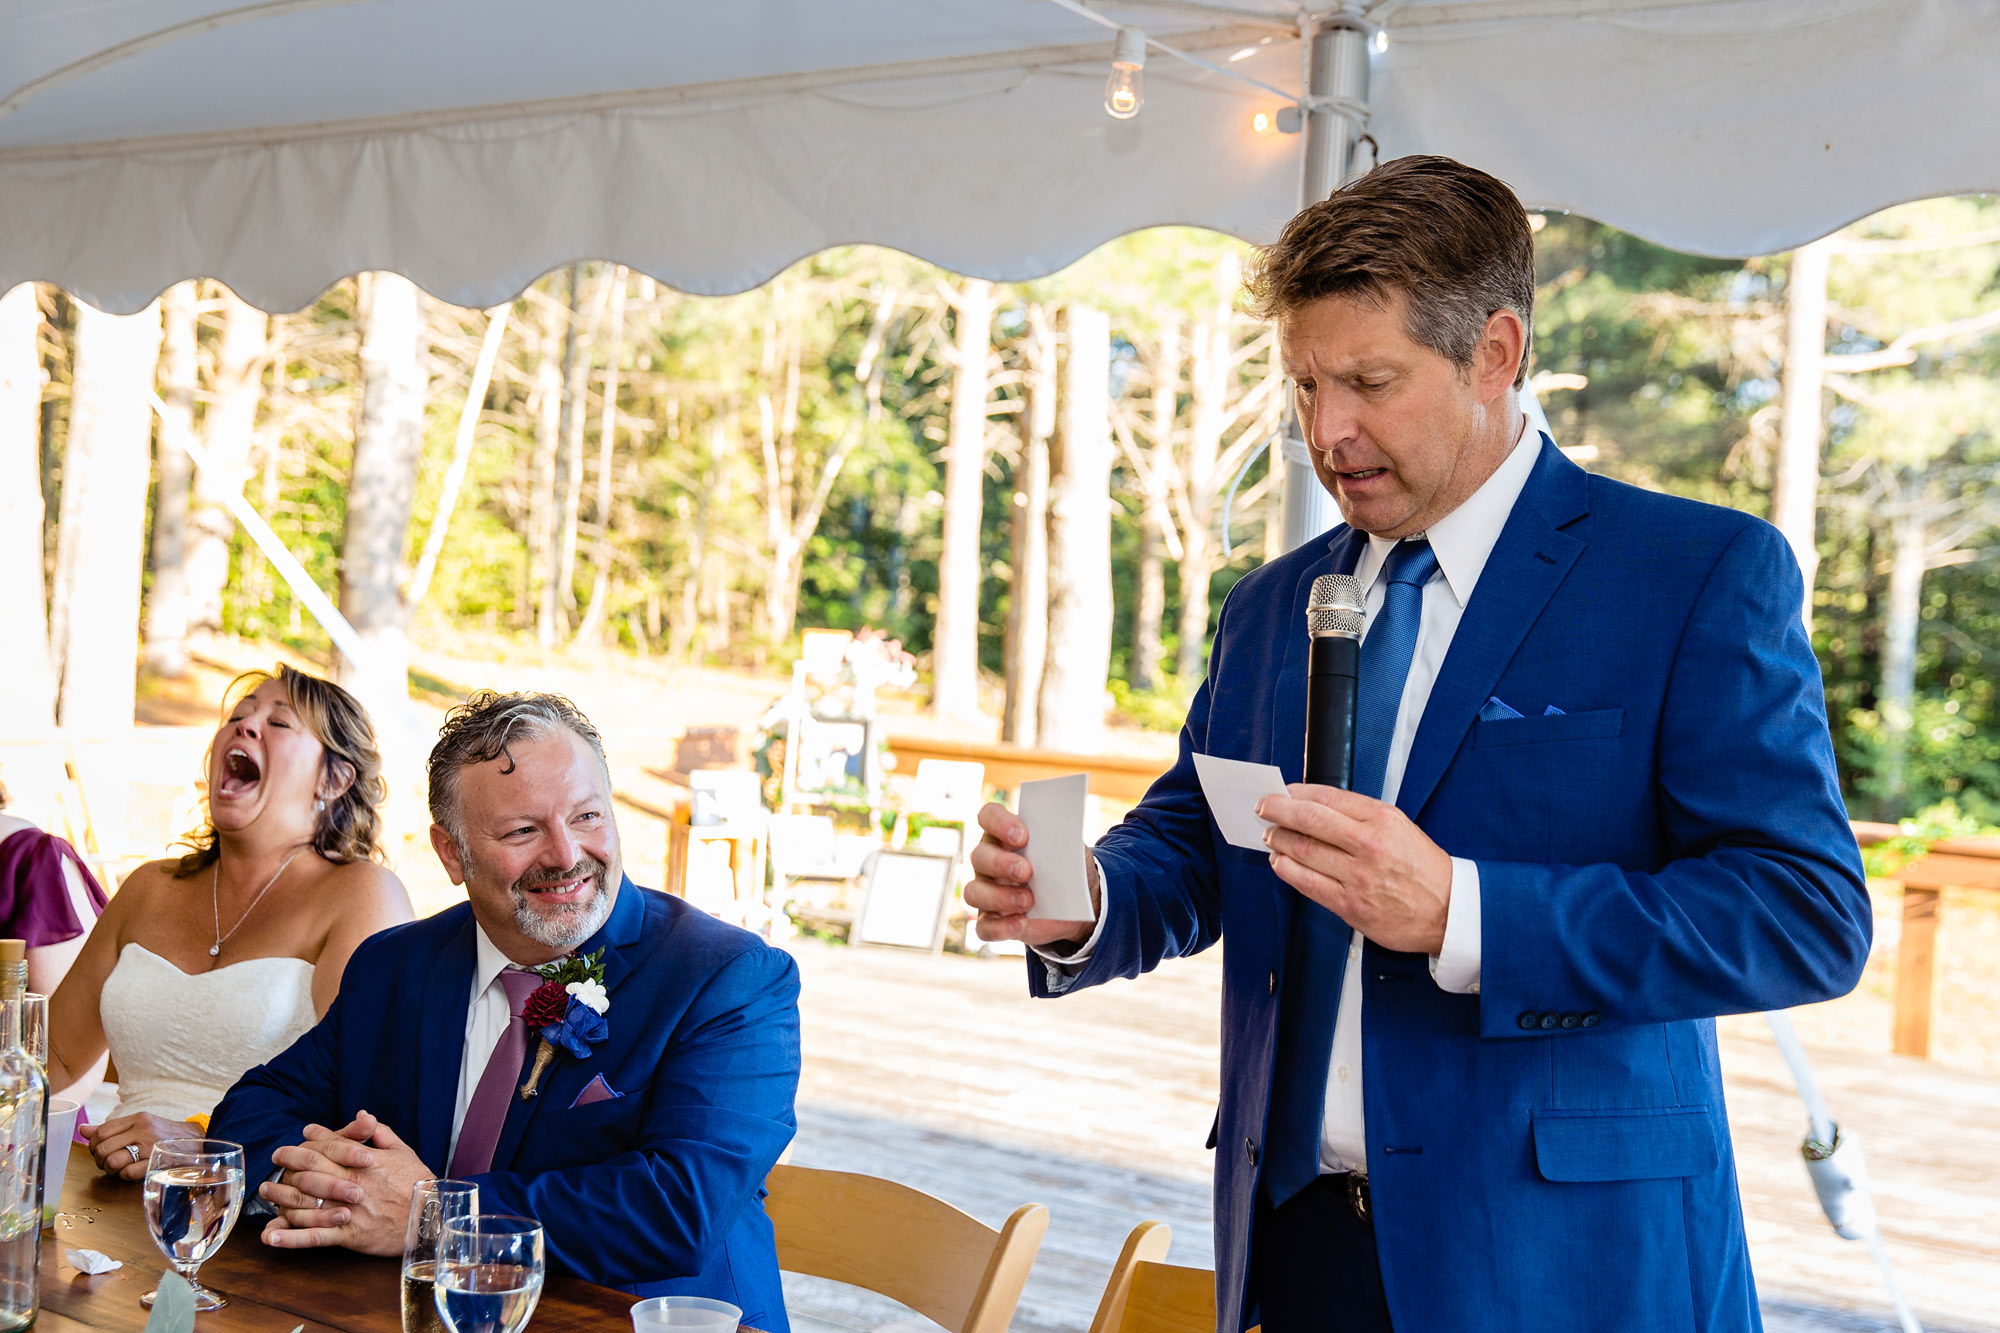 Emotional wedding toasts at a wedding in Newry Maine